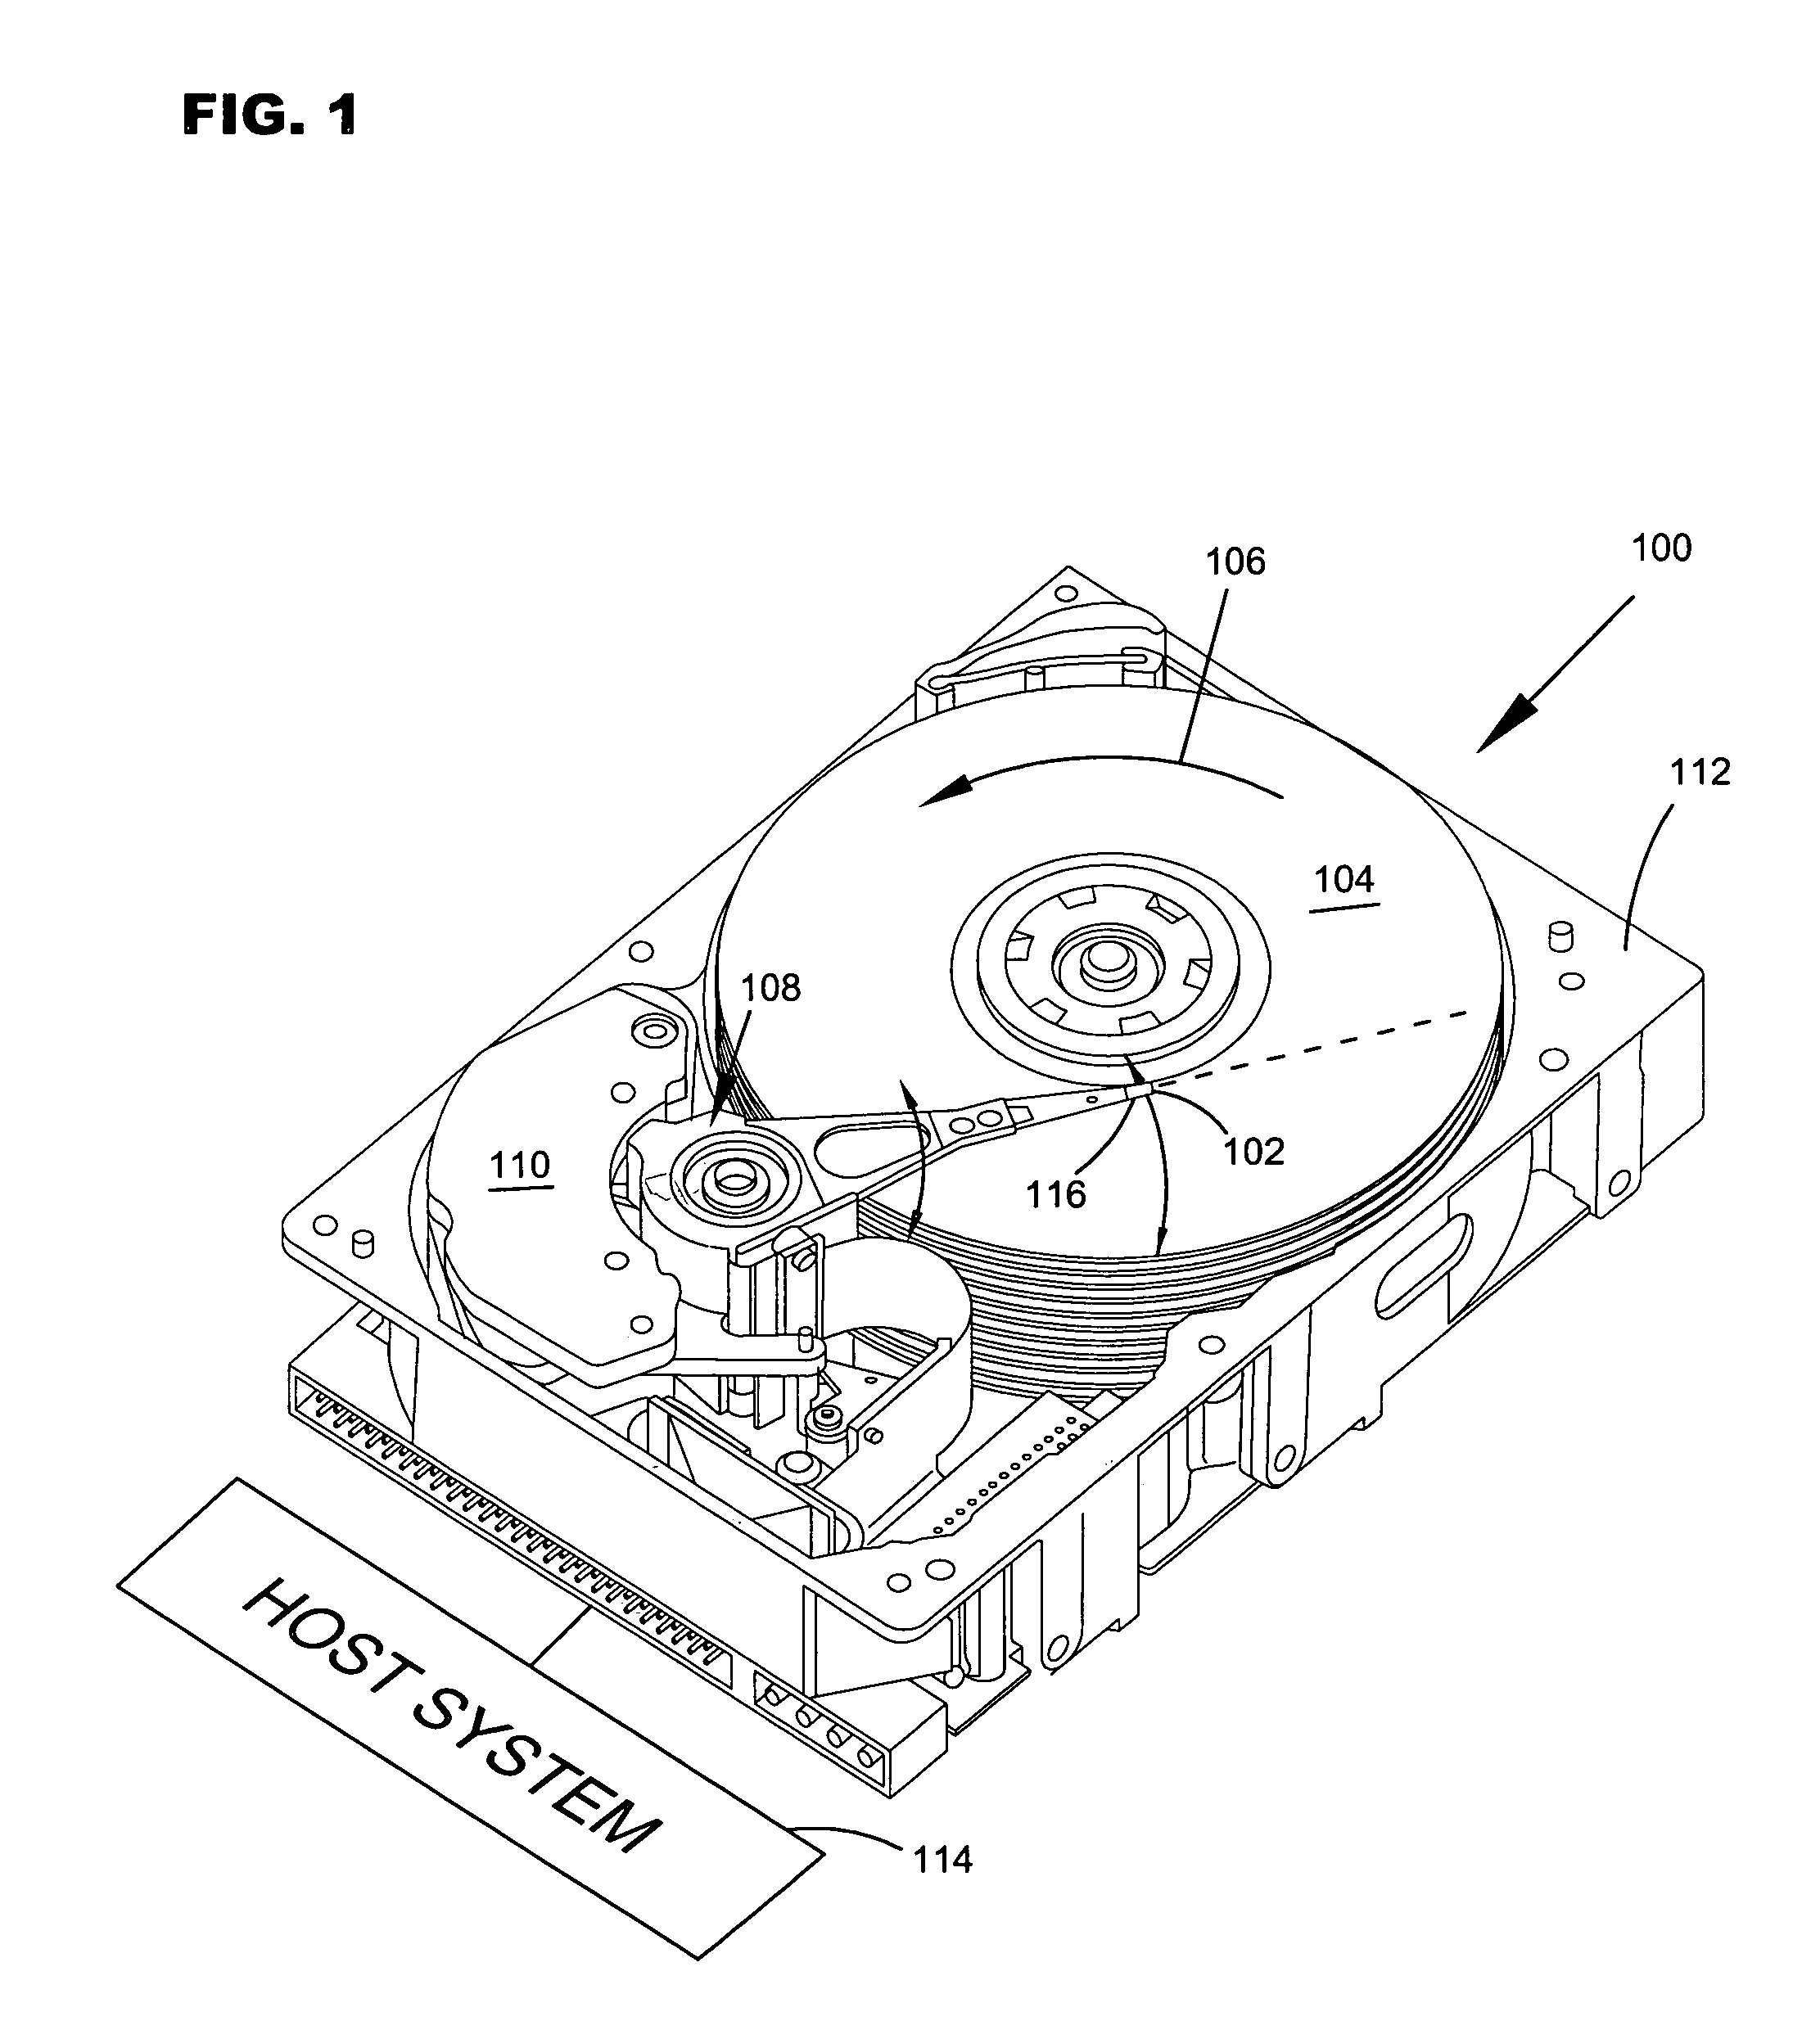 Slider for a data storage device having improved stiction control with reduced interference with air bearing pressurization